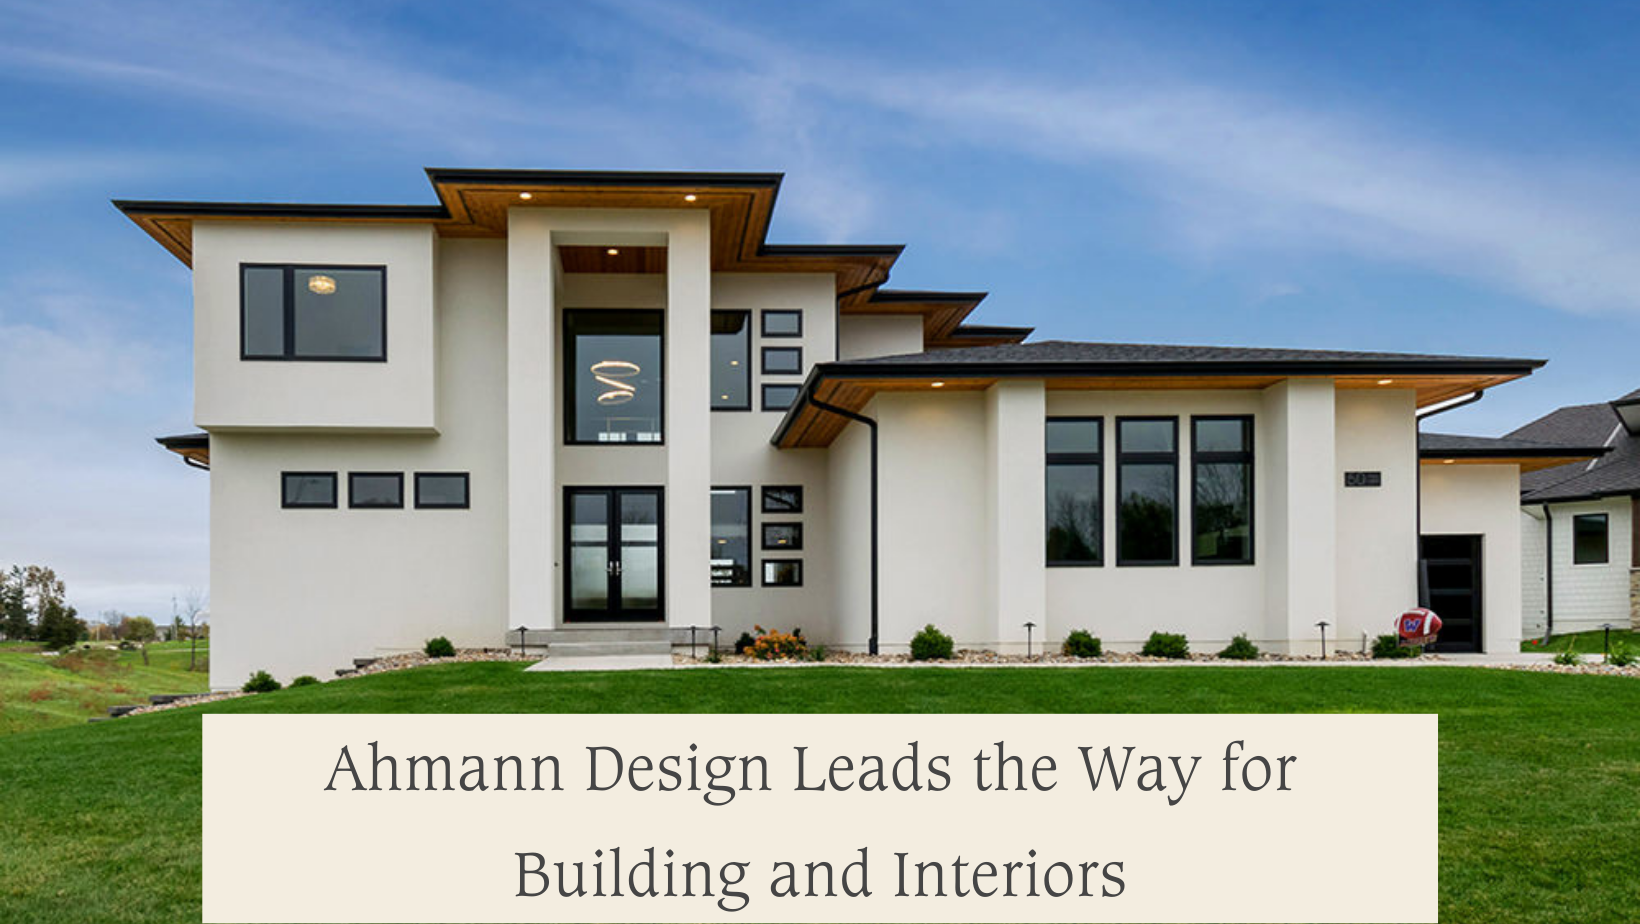 Ahmann Design Leads the Way for Building and Interiors